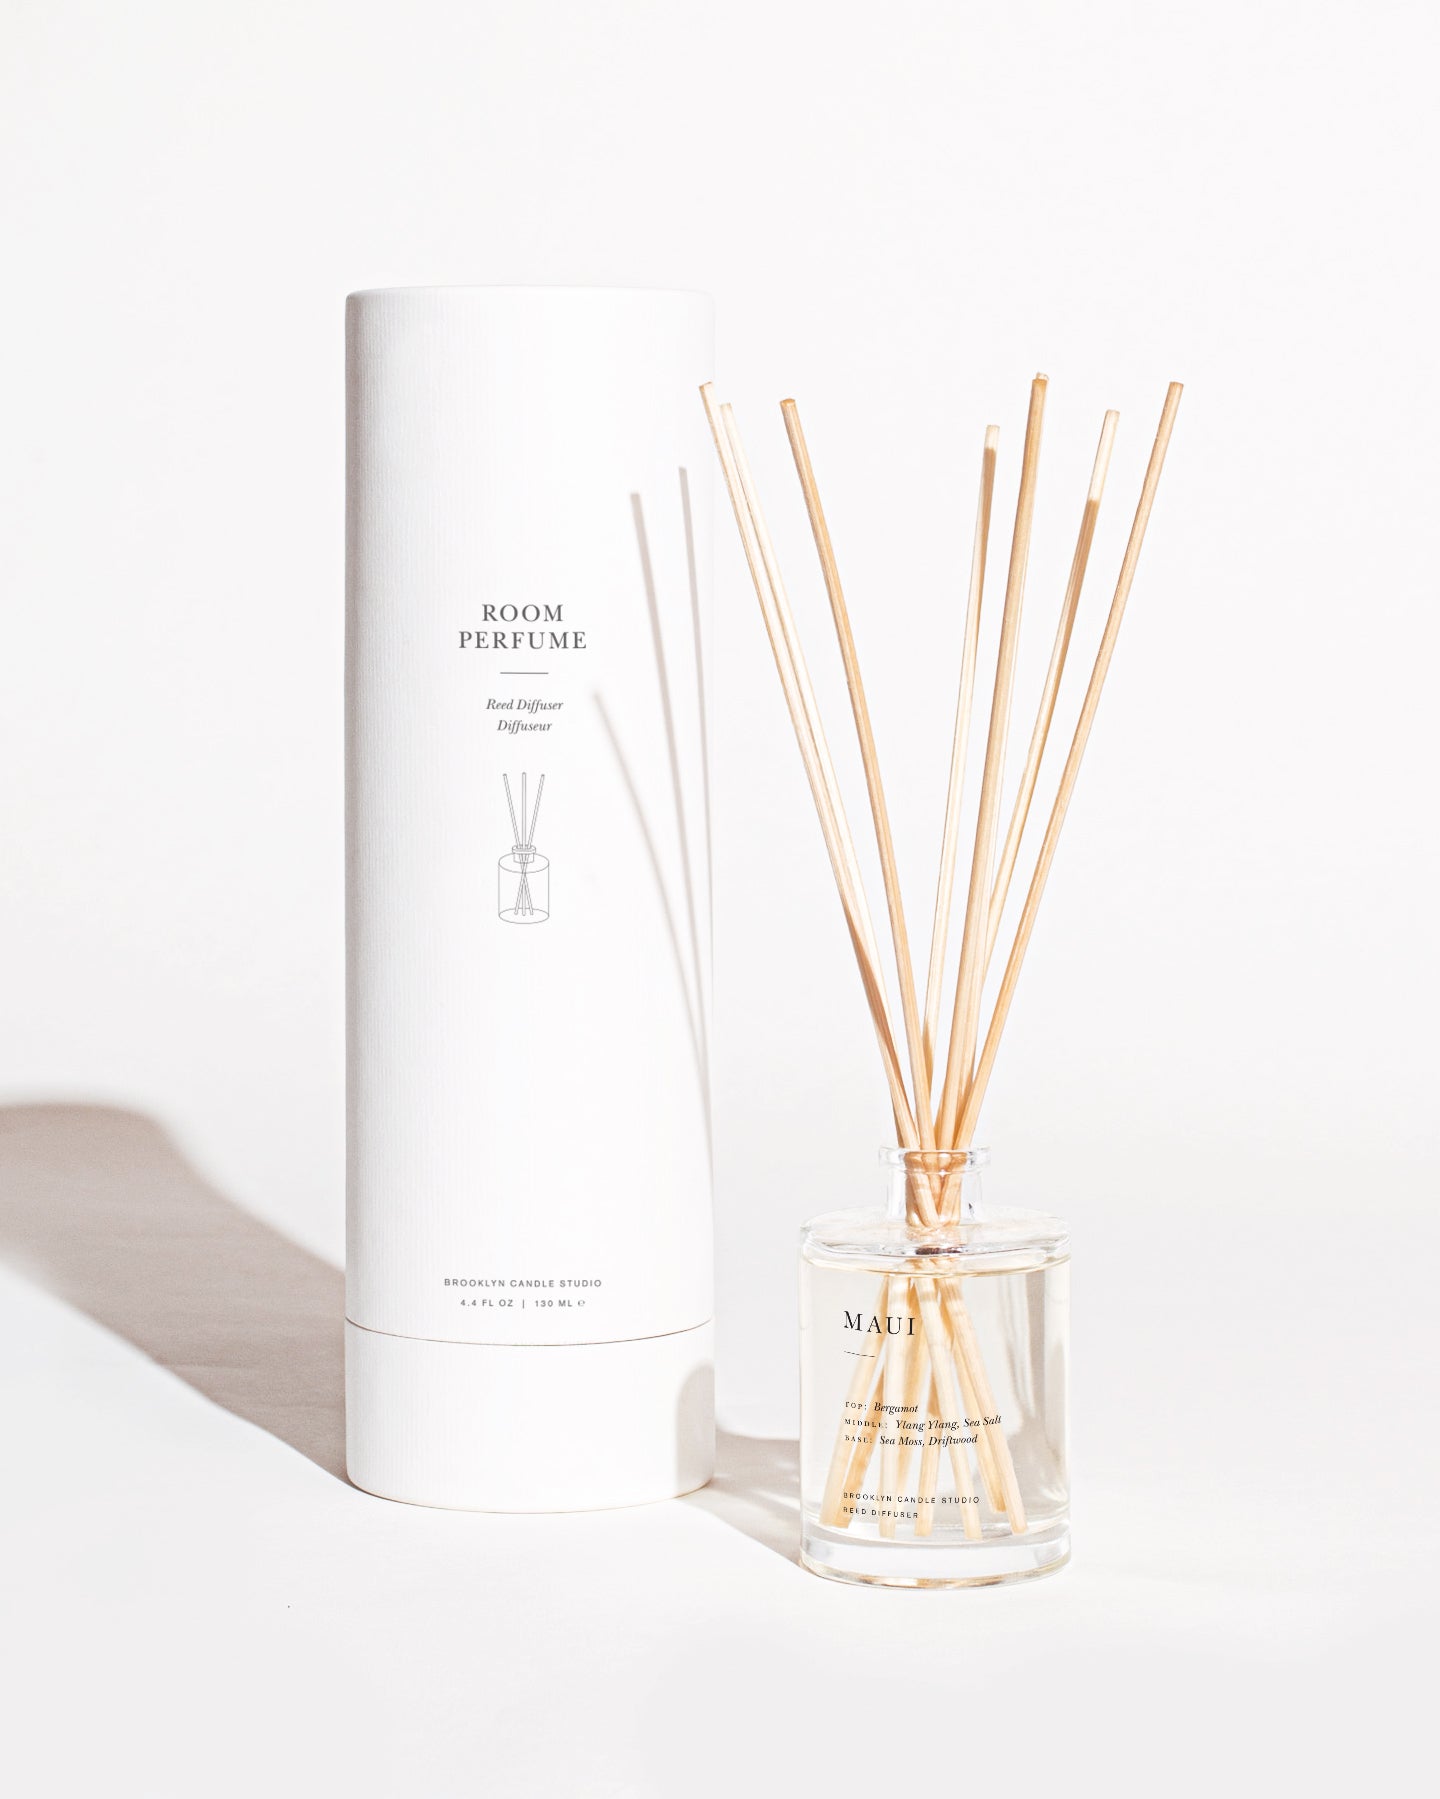 A cylindrical white box labeled "Maui Reed Diffuser by Brooklyn Candle Studio" stands next to a clear glass bottle filled with liquid and several natural reed diffuser sticks extending out, exuding a botanical aroma. The setup is clean and minimalistic against a white background.